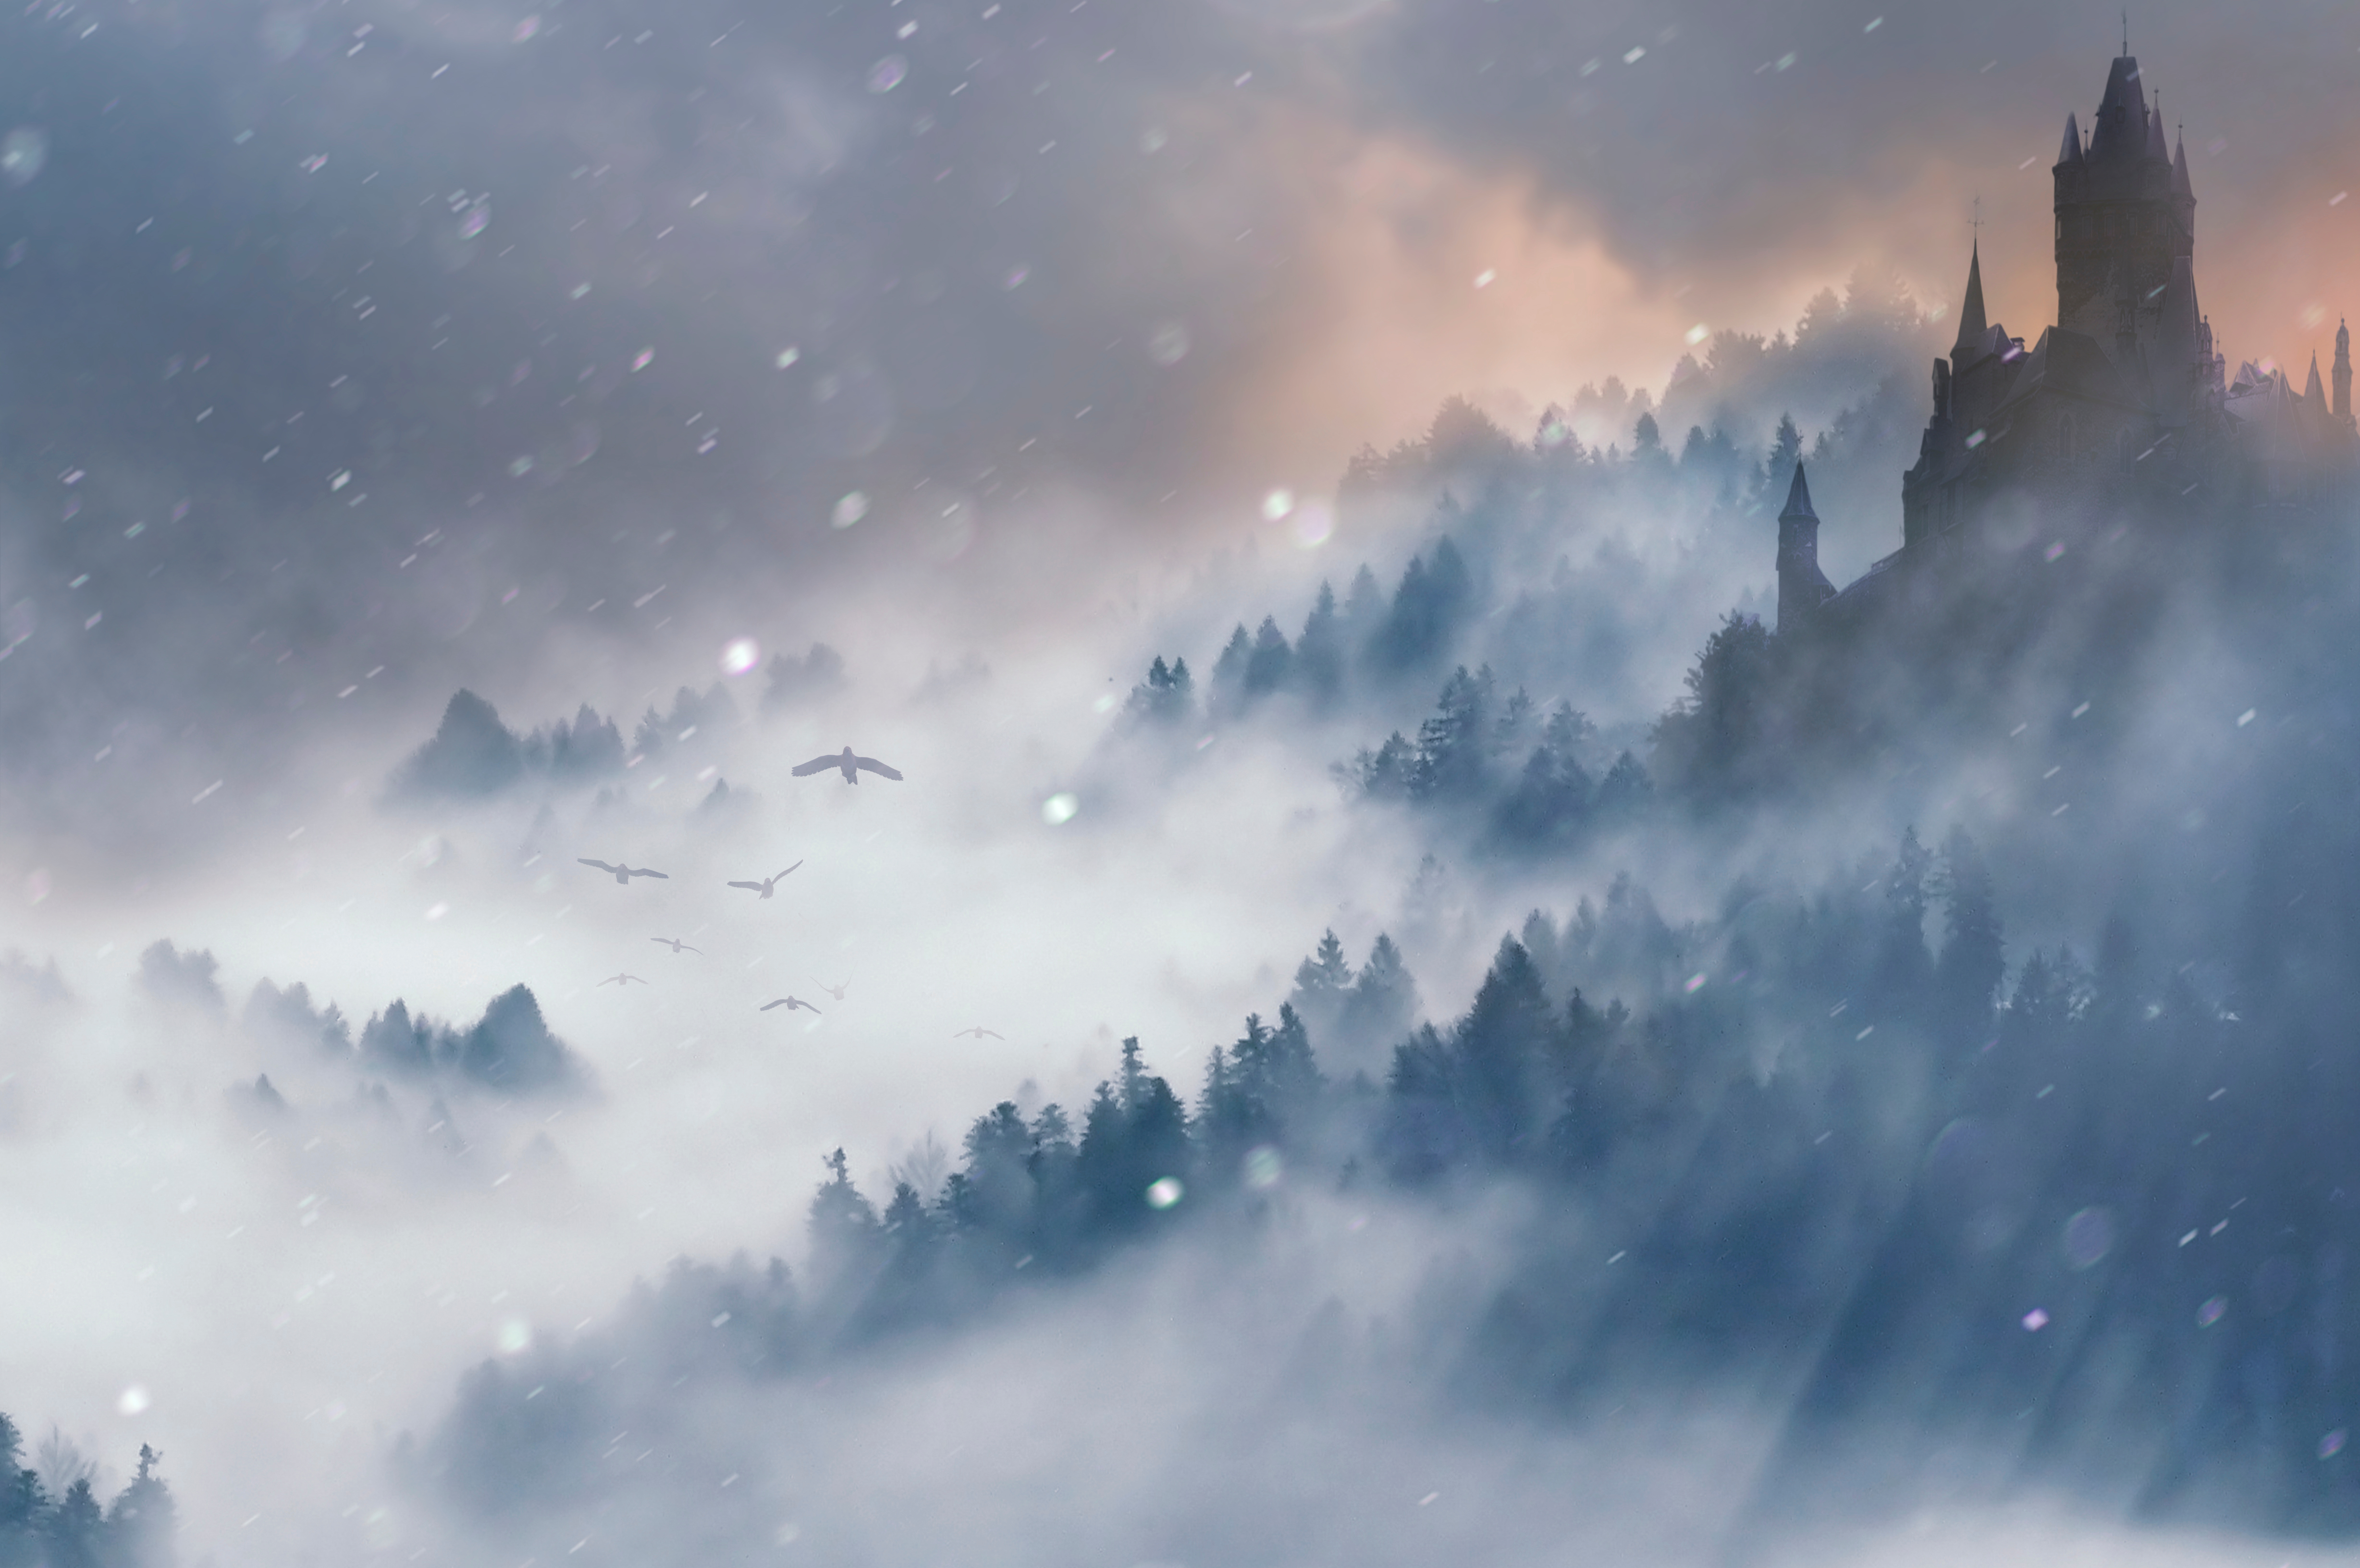 A castle on a mountain with mist and snow falling. Birds are flying in the background.